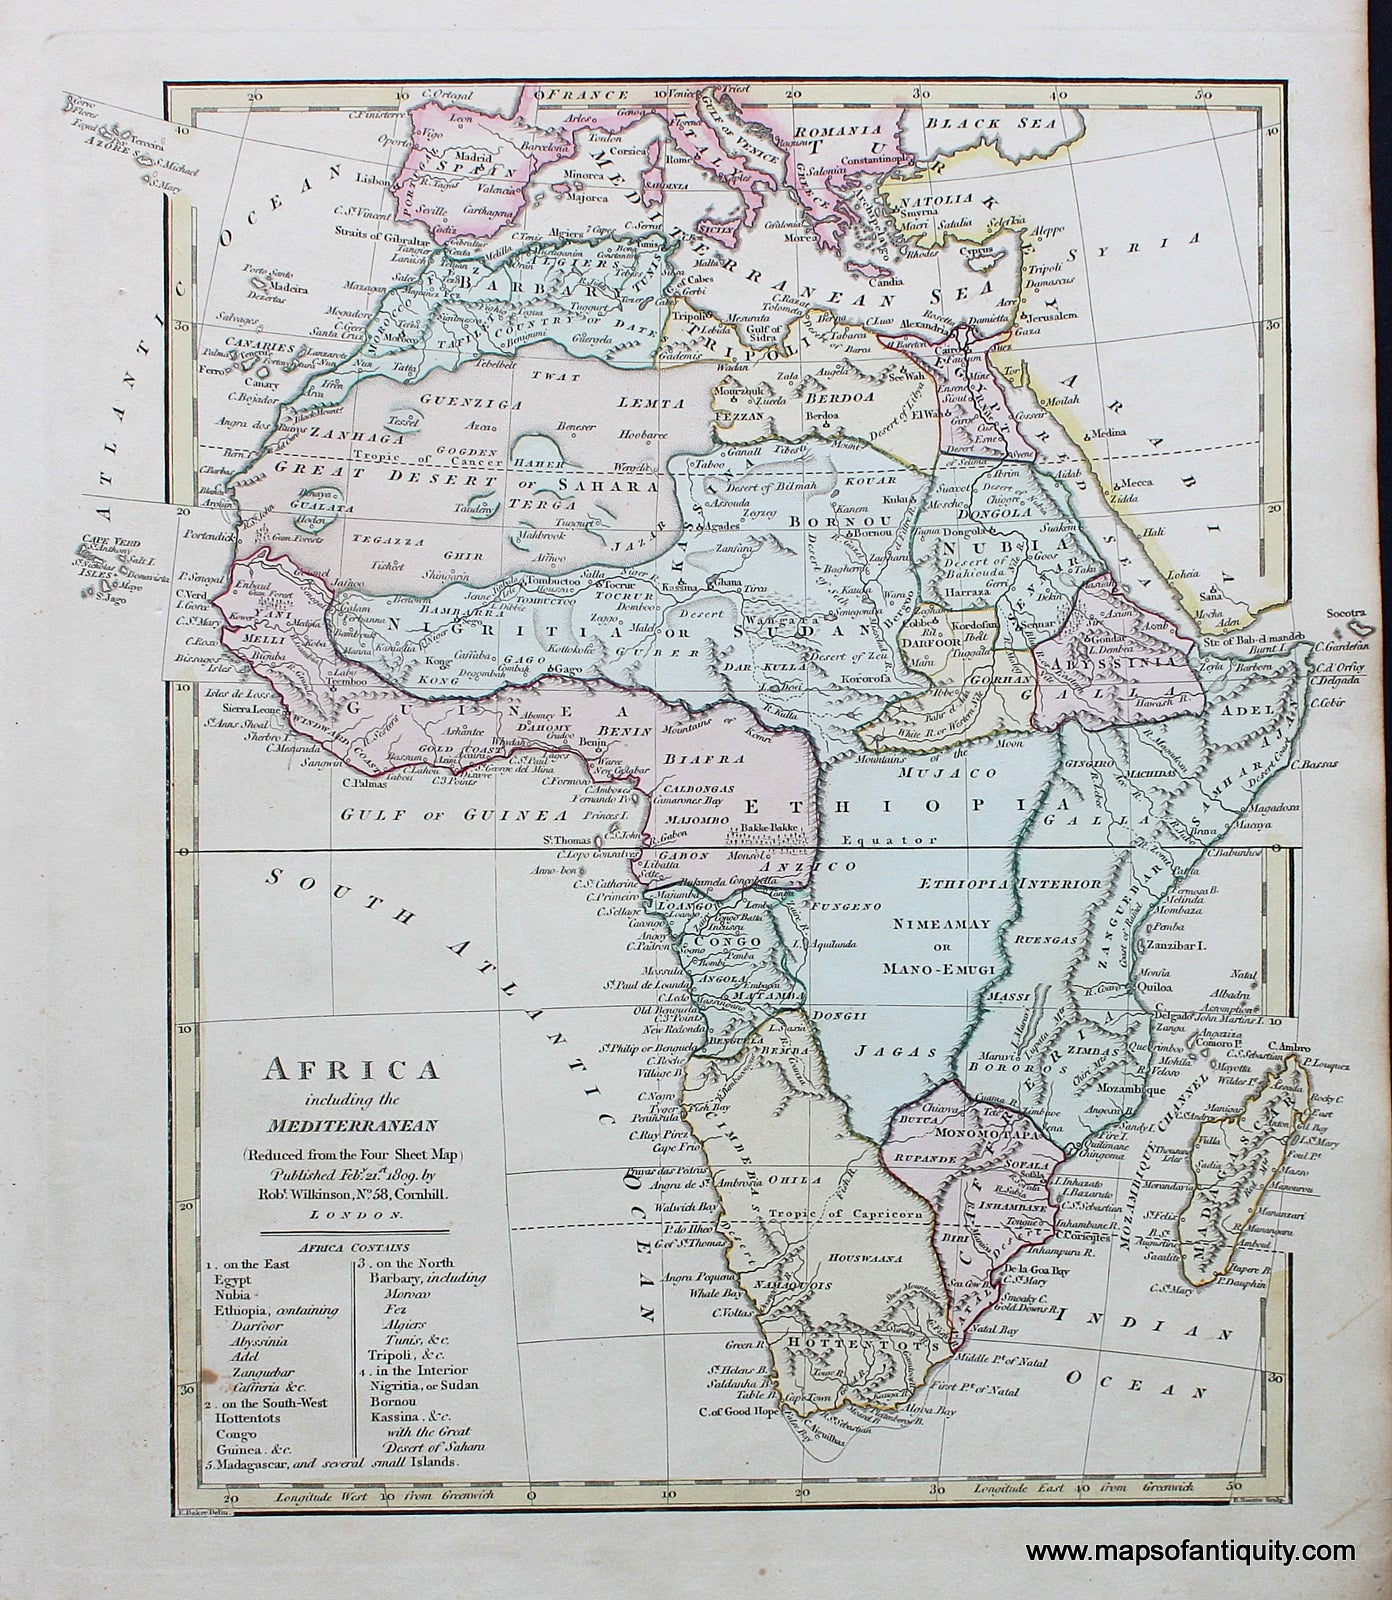 Antique-Hand-Colored-Map-Africa-including-the-Mediterranean**********-Africa-Africa-General-1809-Wilkinson-Maps-Of-Antiquity